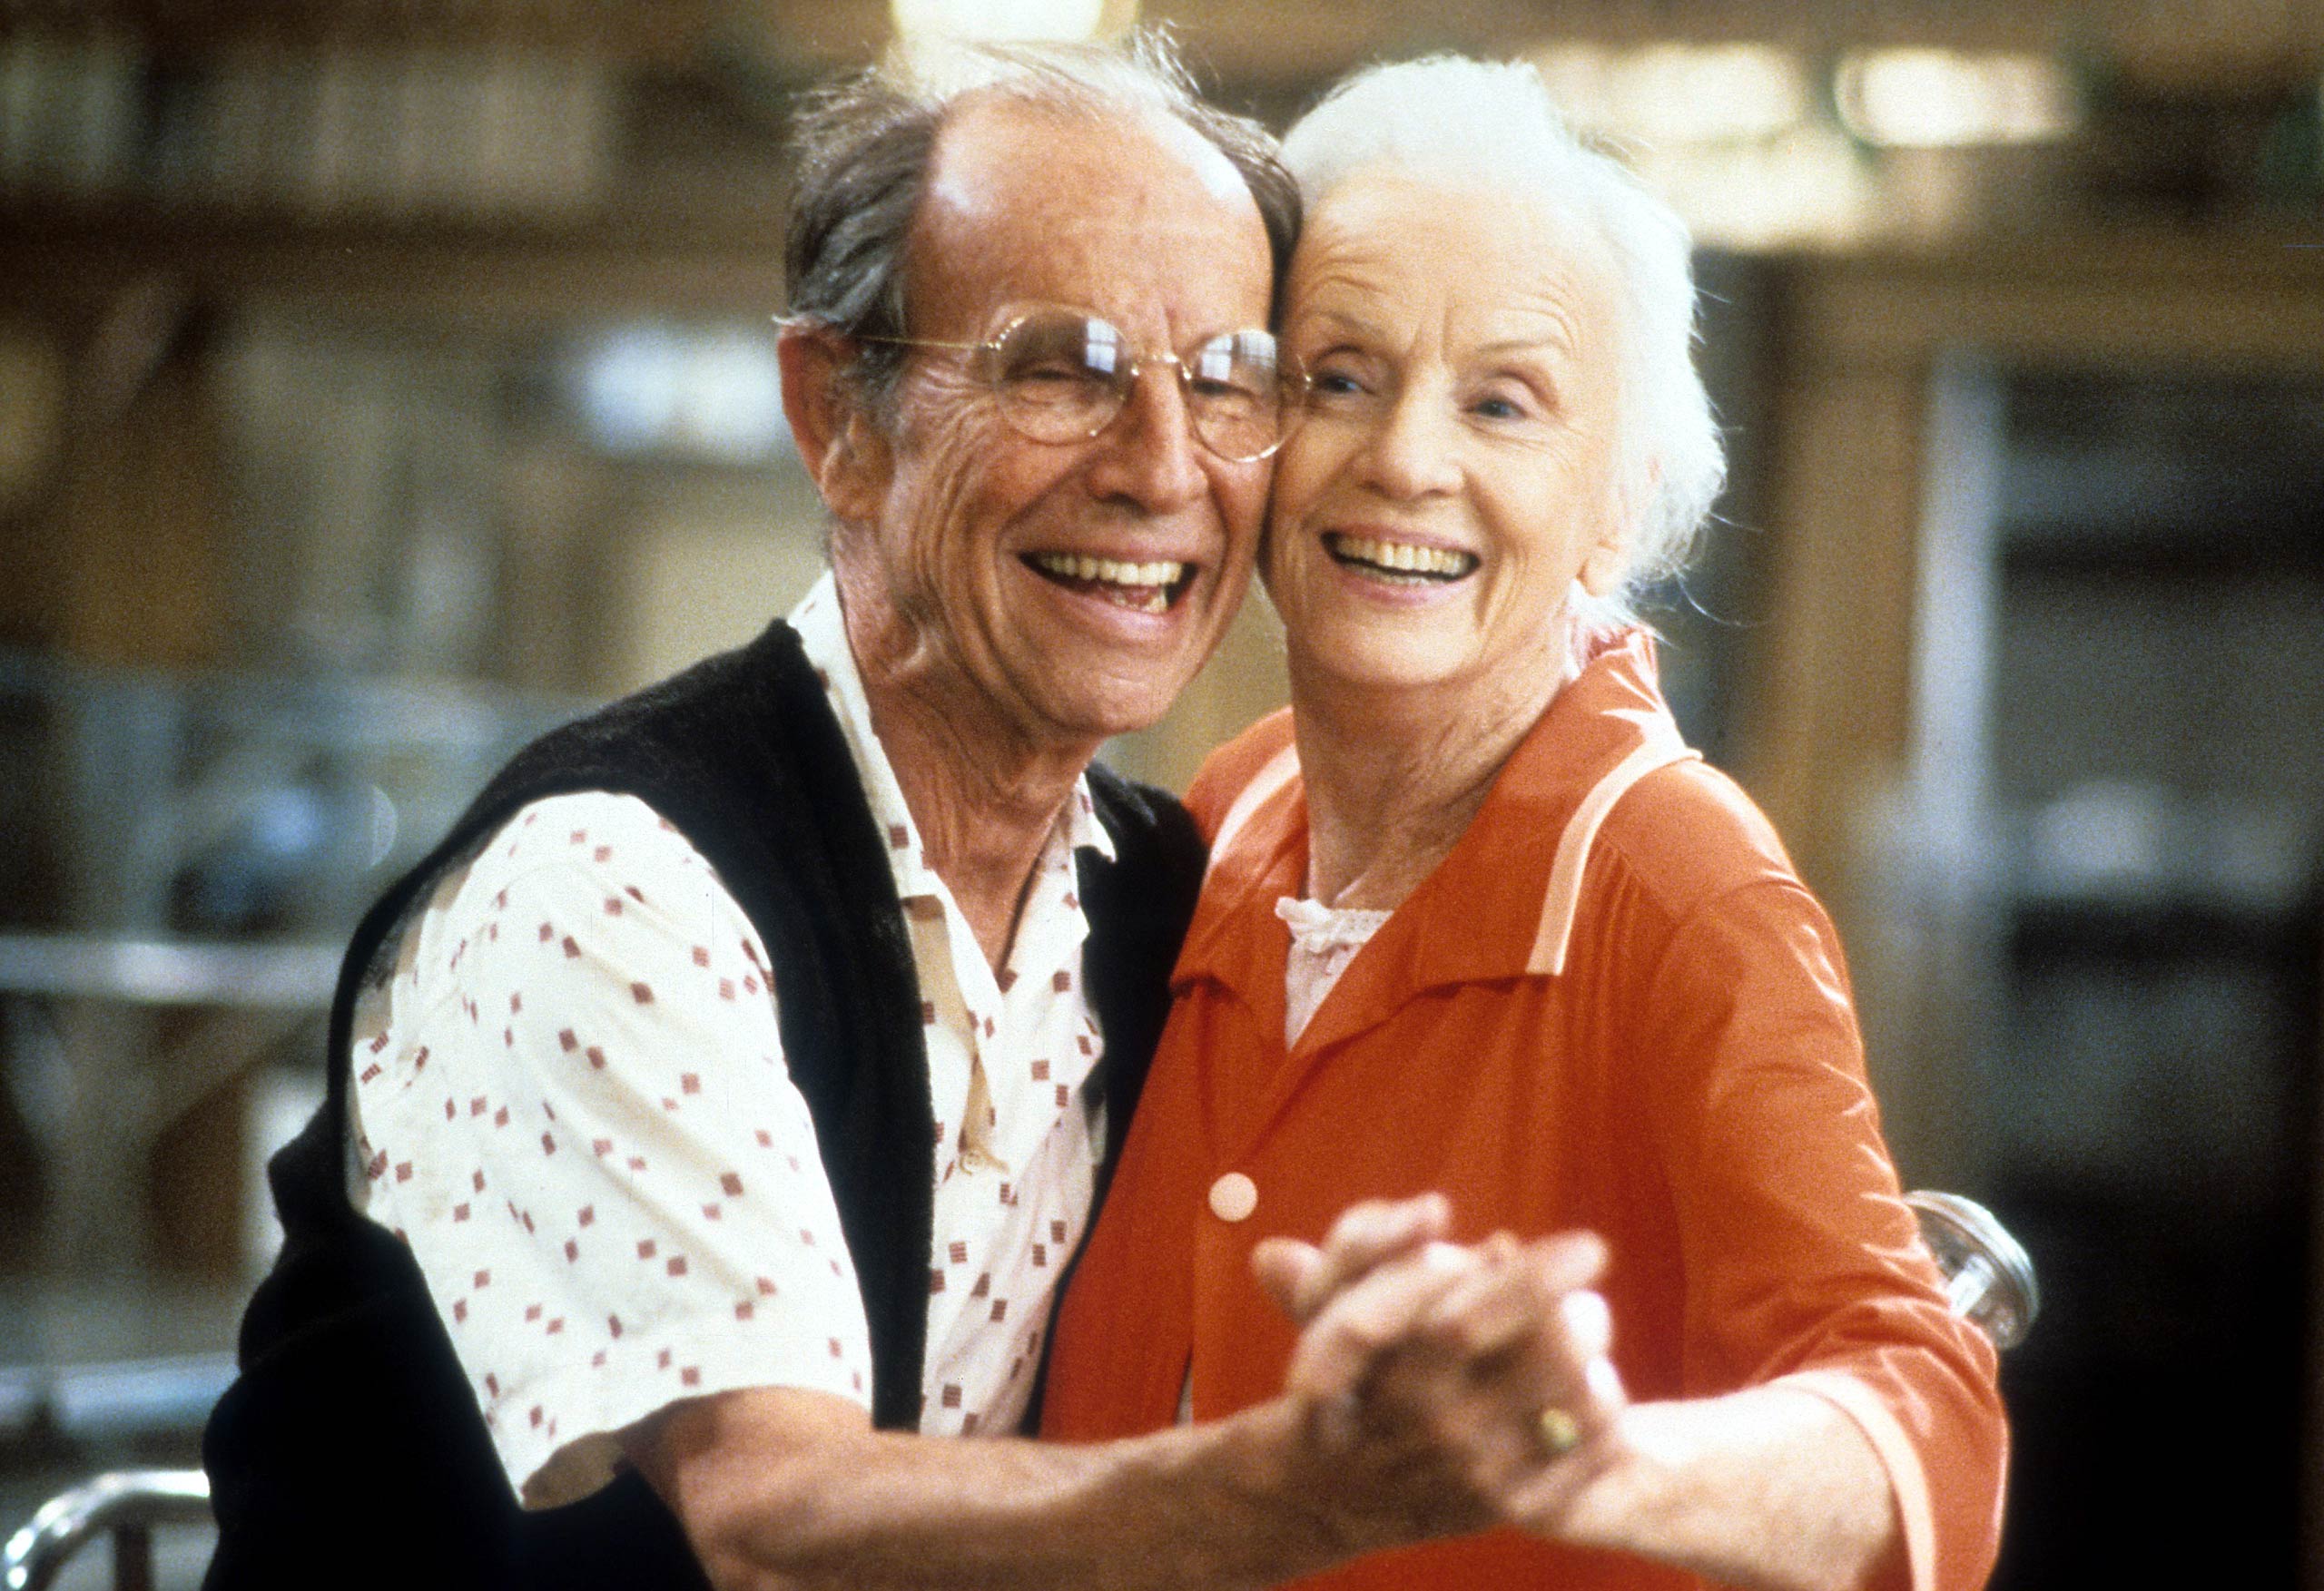 Hume Cronyn And Jessica Tandy In 'Cocoon:The Return'